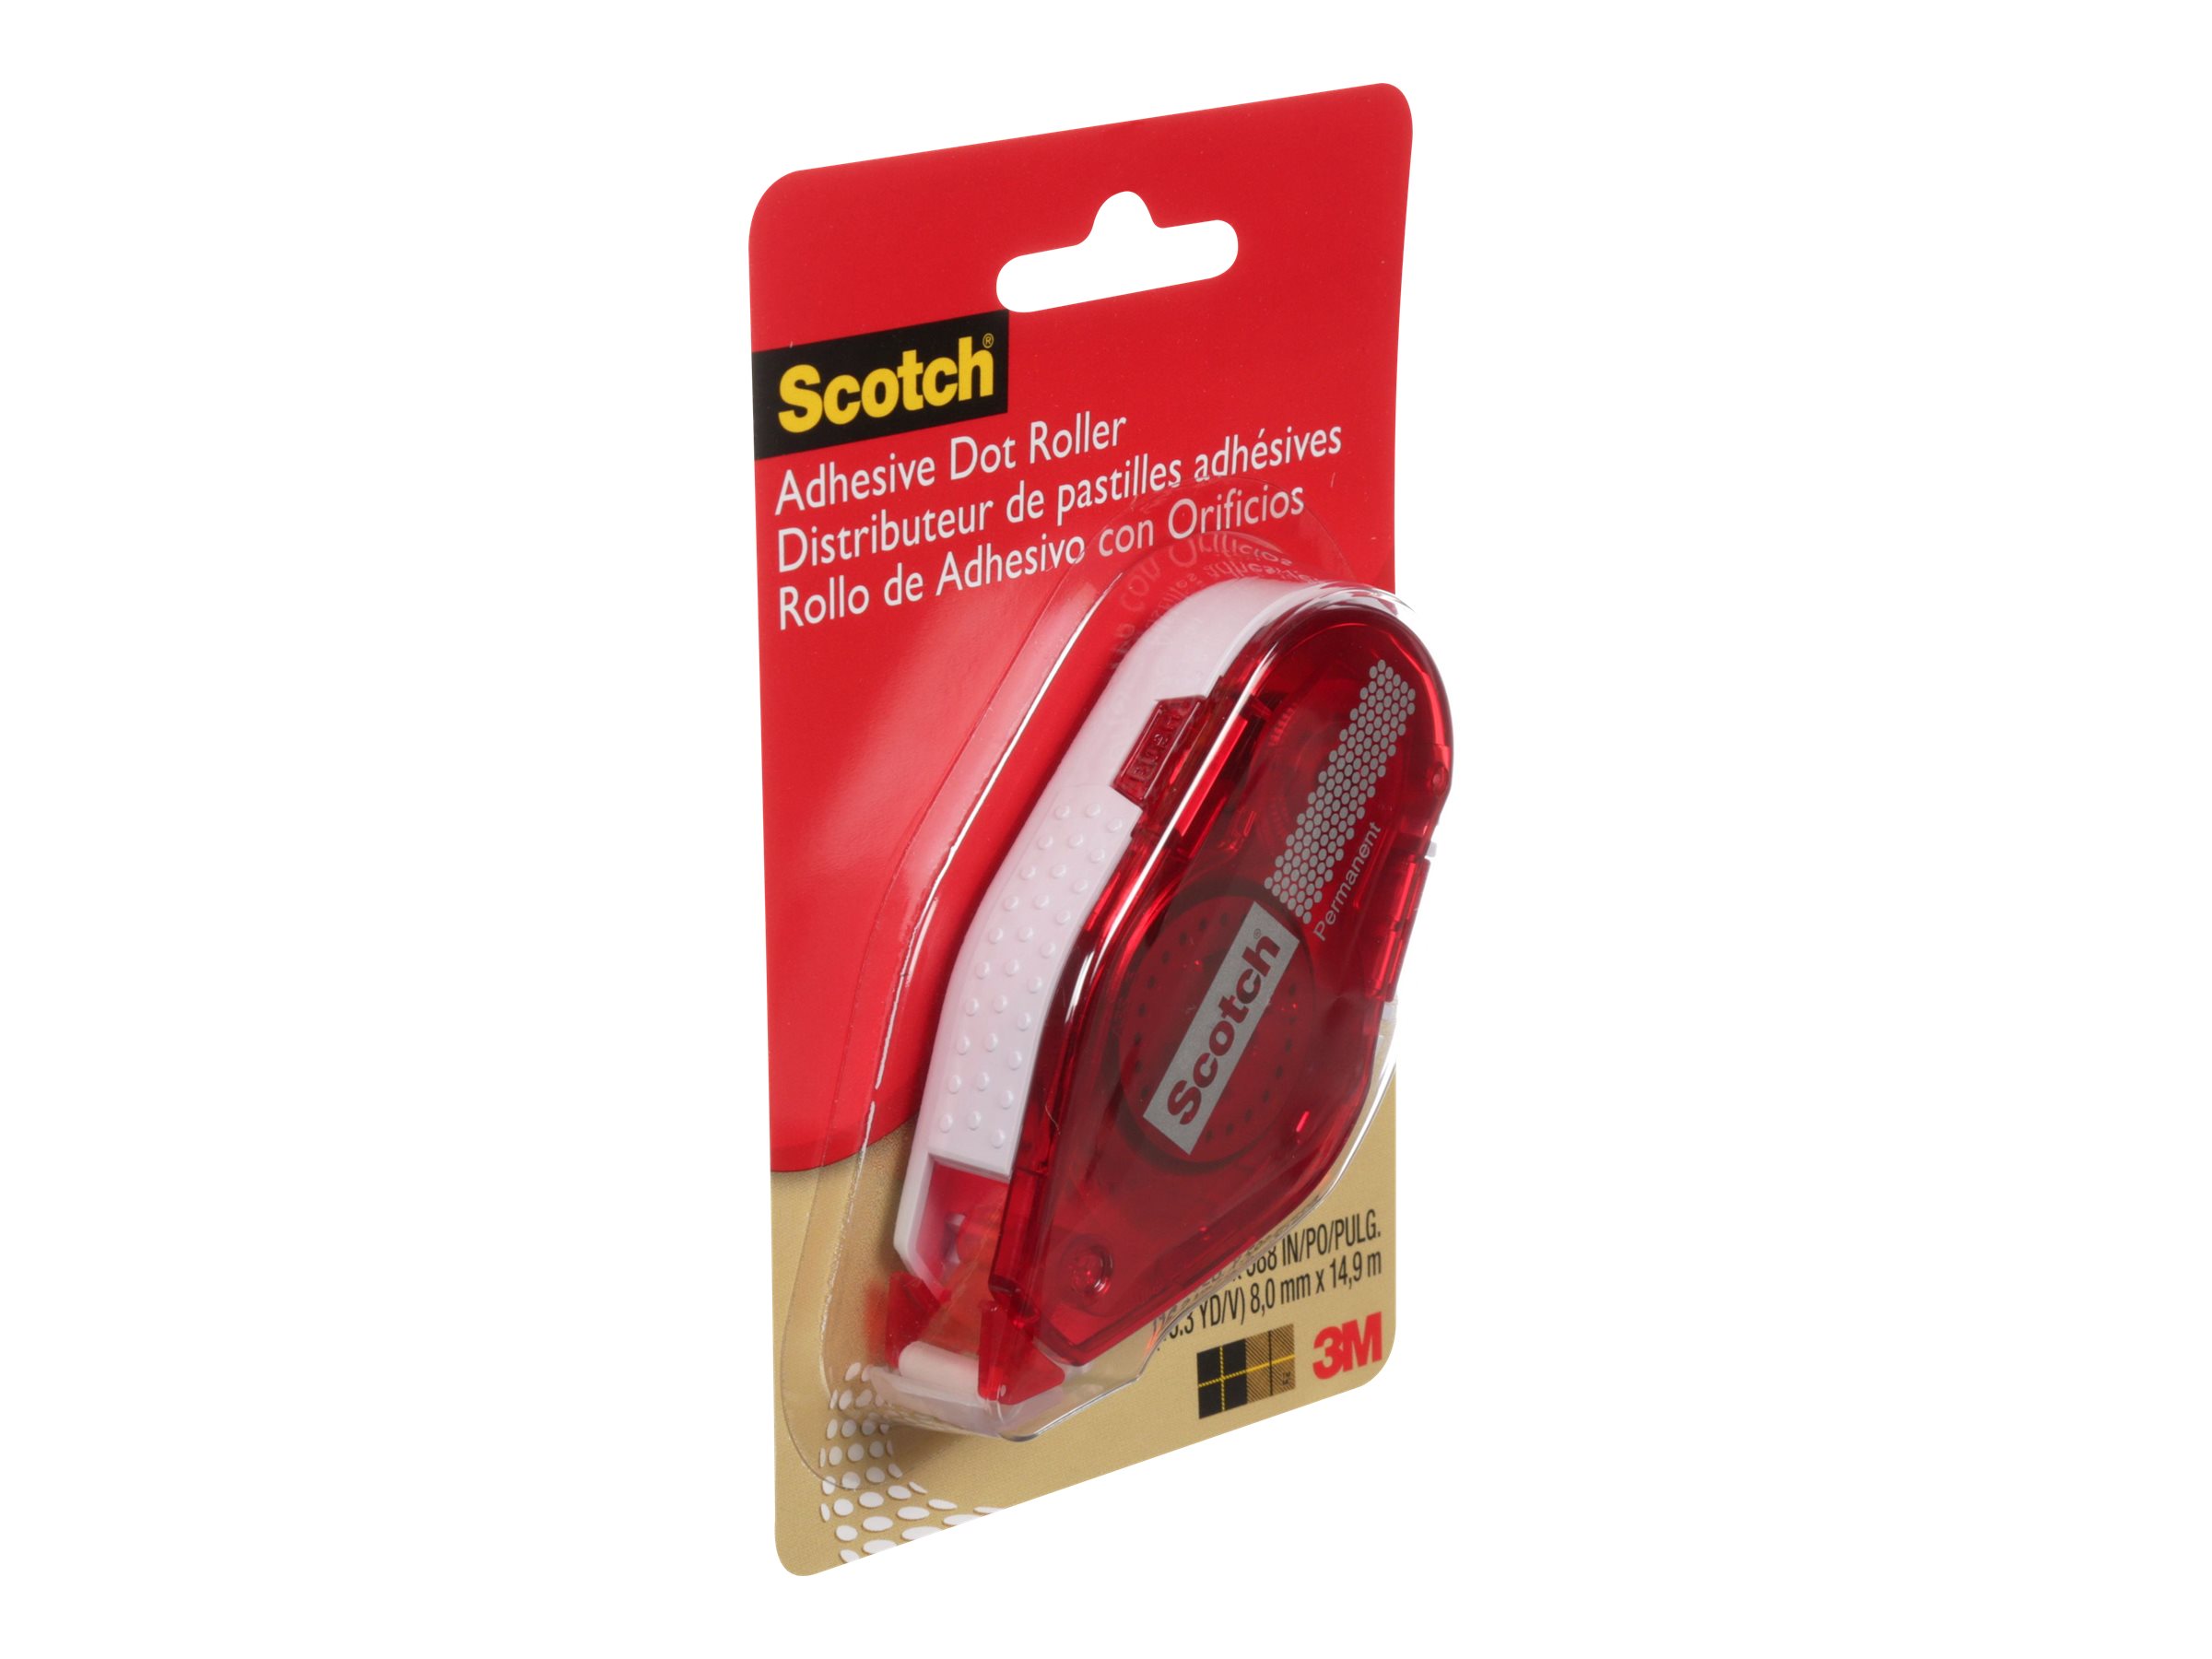 Scotch Double Sided Adhesive Roller, .27 in x 26 ft, Red .27in